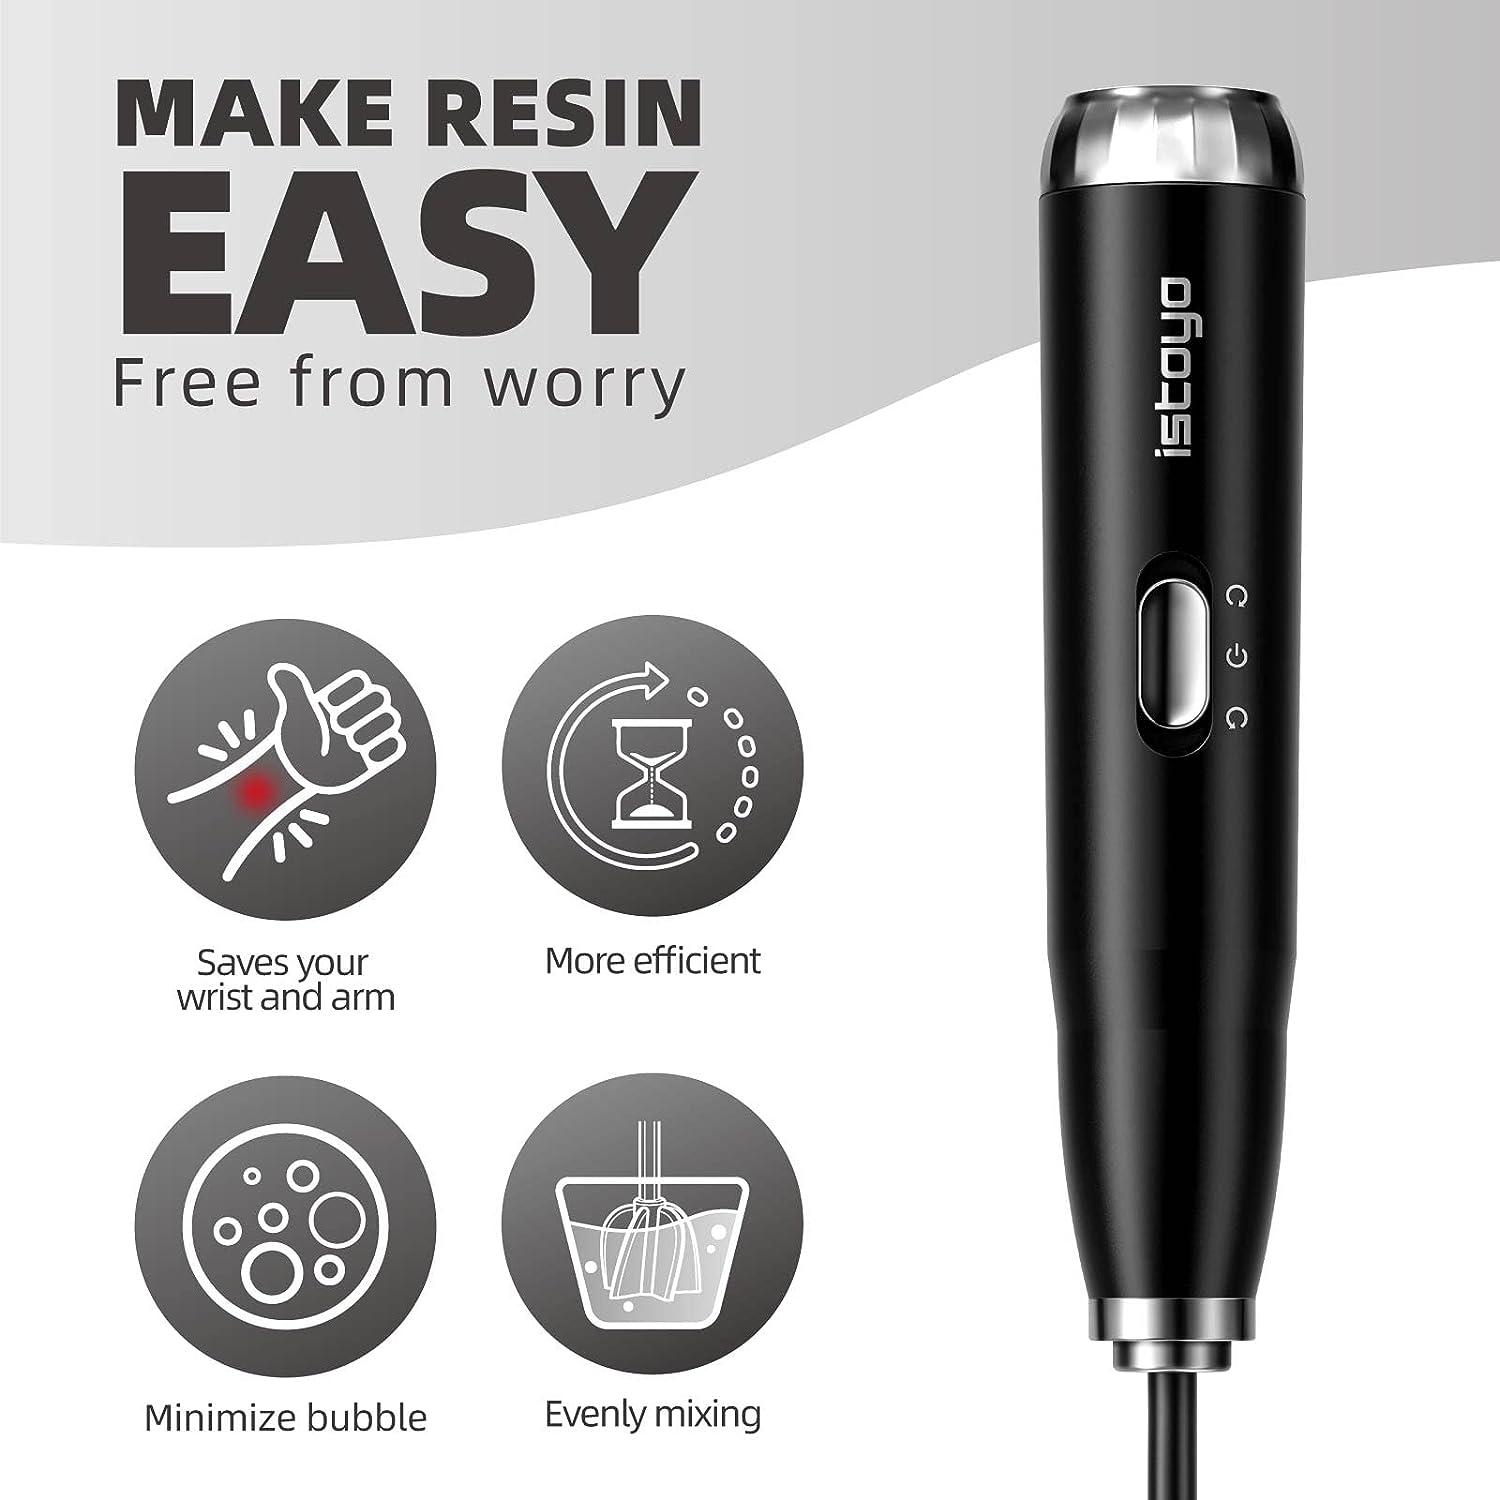 ISTOYO Premium Resin Mixer, Handheld Battery Epoxy Mixer for Saving Your  Wrist, Epoxy Resin Mixer Pro, Resin Stirrer for Resin, Resin Molds,  Silicone Molds Mixing, DIY Crafts (Included 4 pcs Paddles) Black